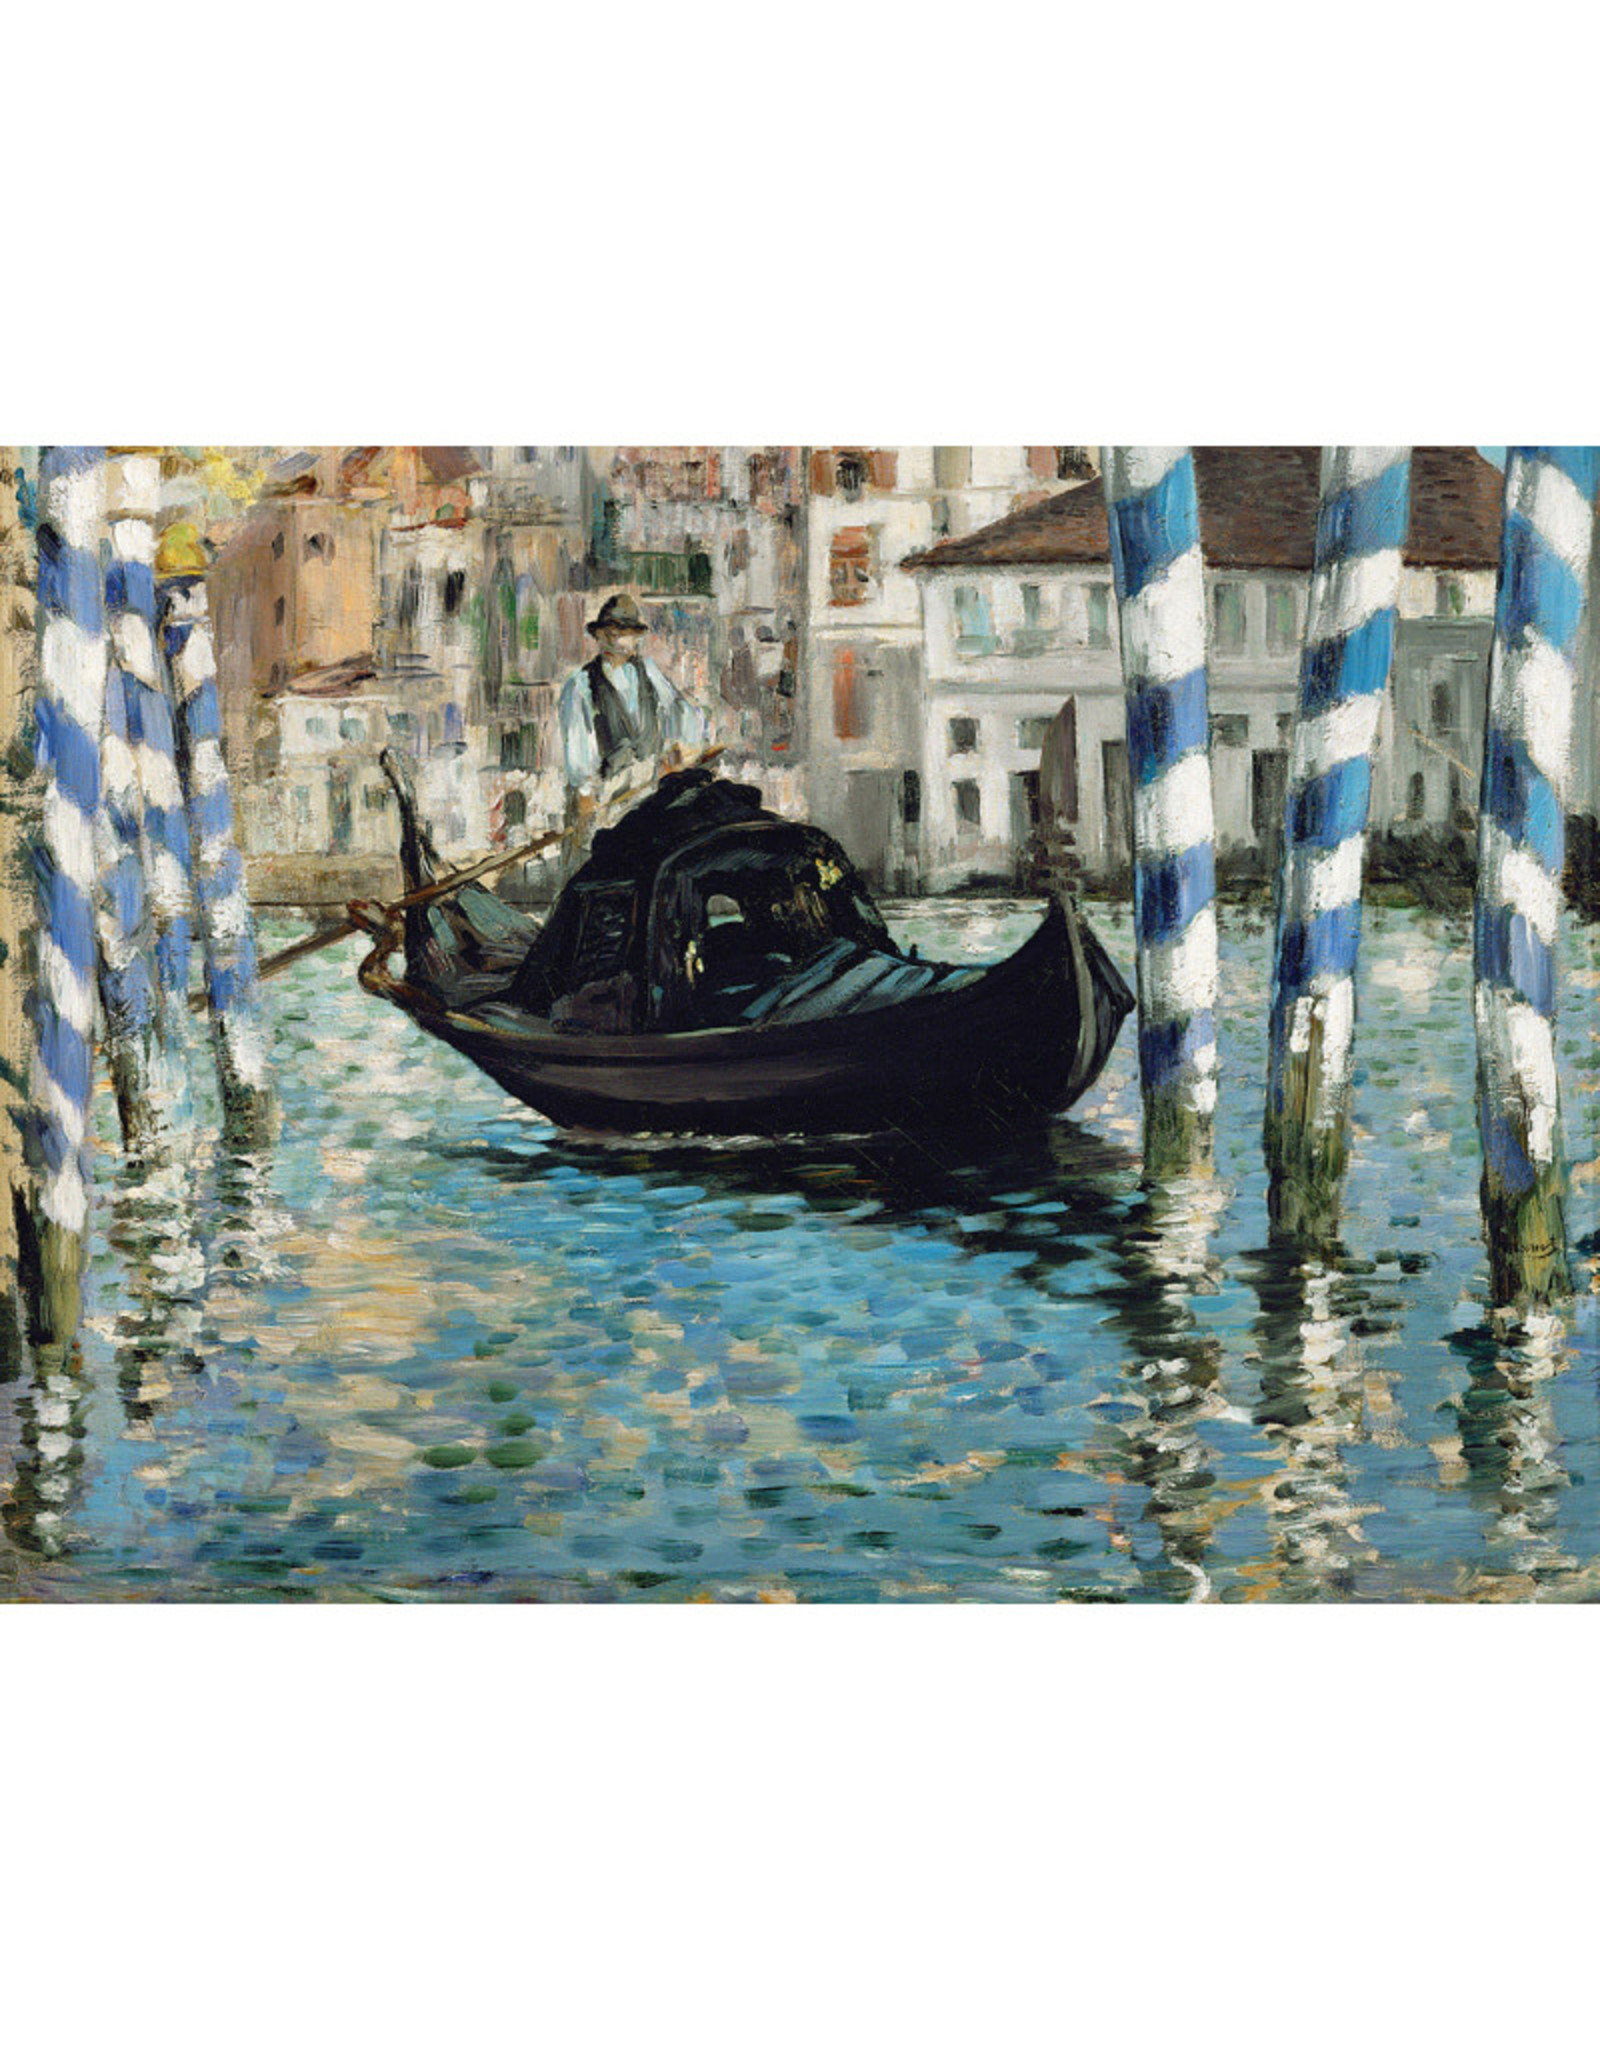 Eurographics The Grand Canal of Venice Puzzle 1000 PCS (Manet)